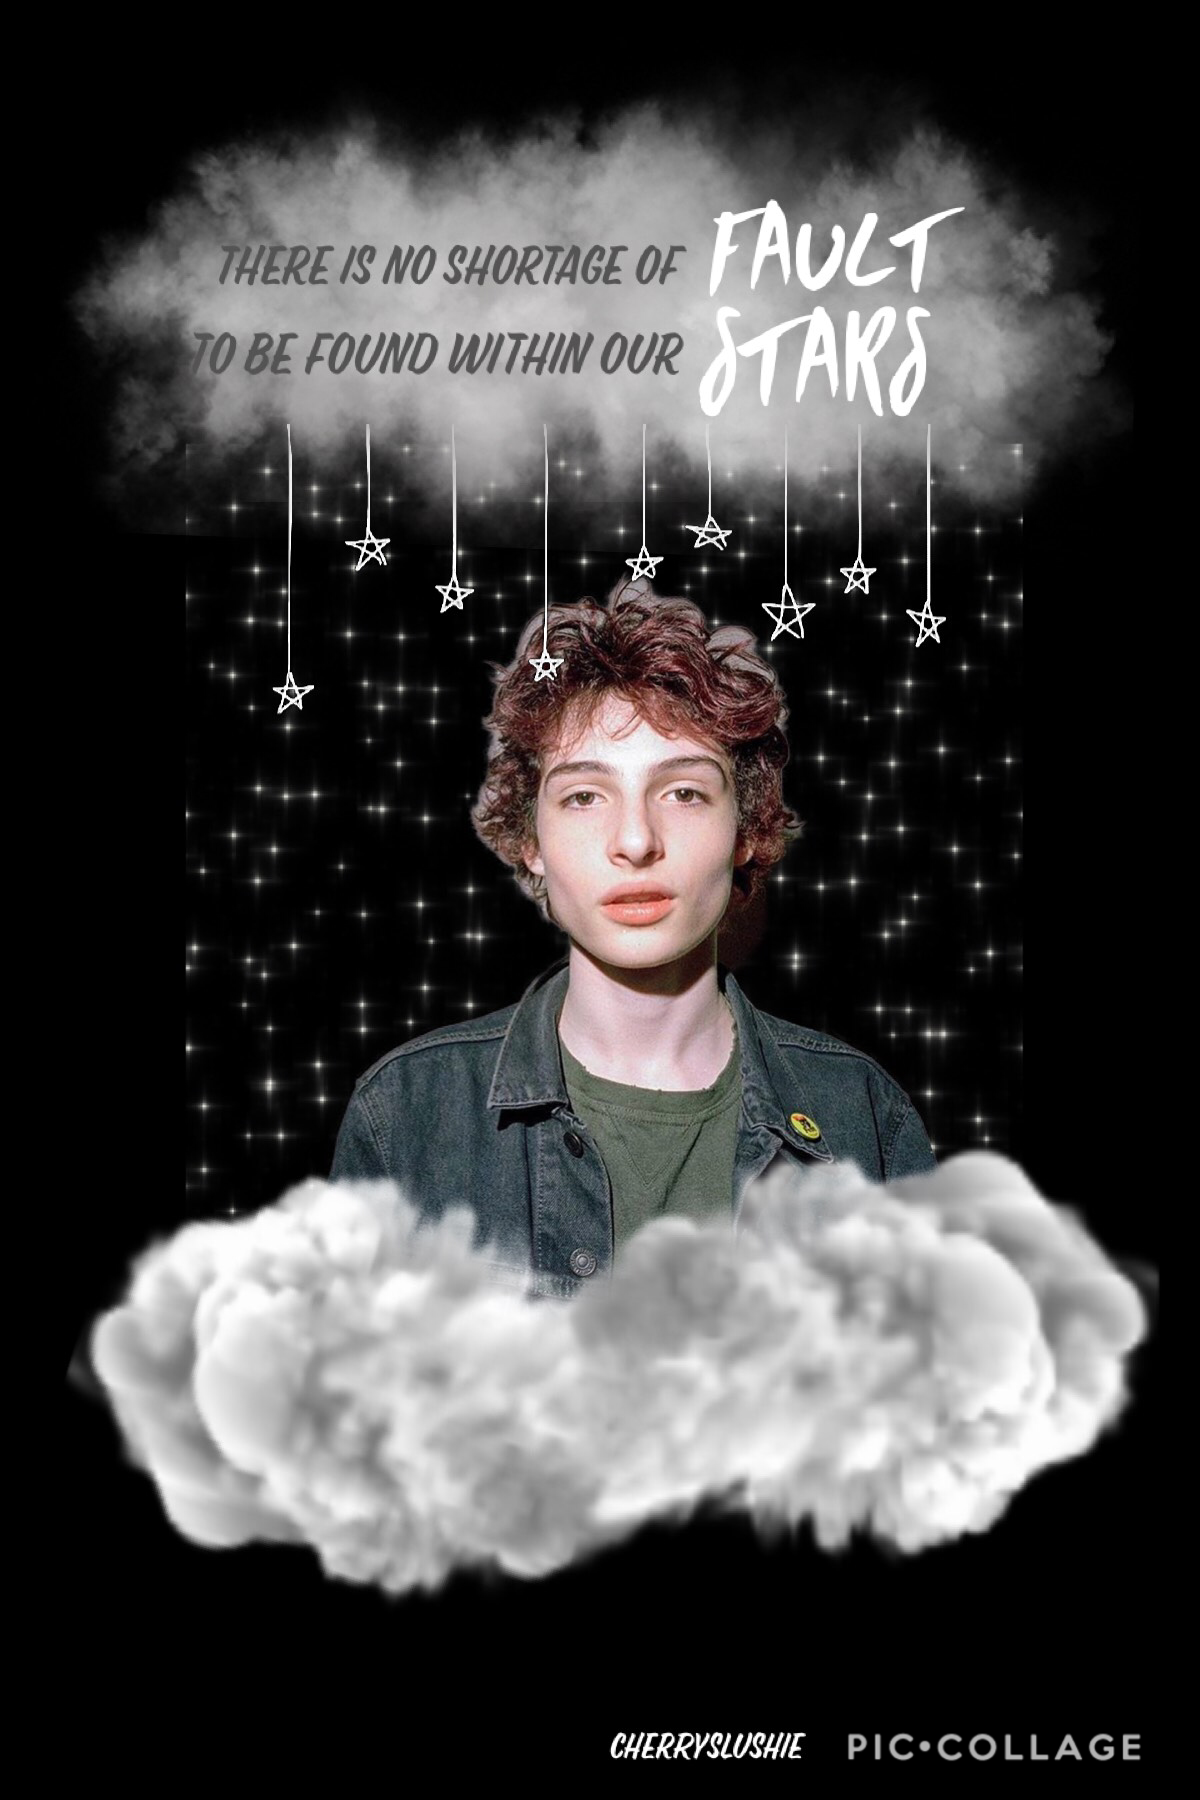 love me a good john green quote, and some finn wolfhard!!!